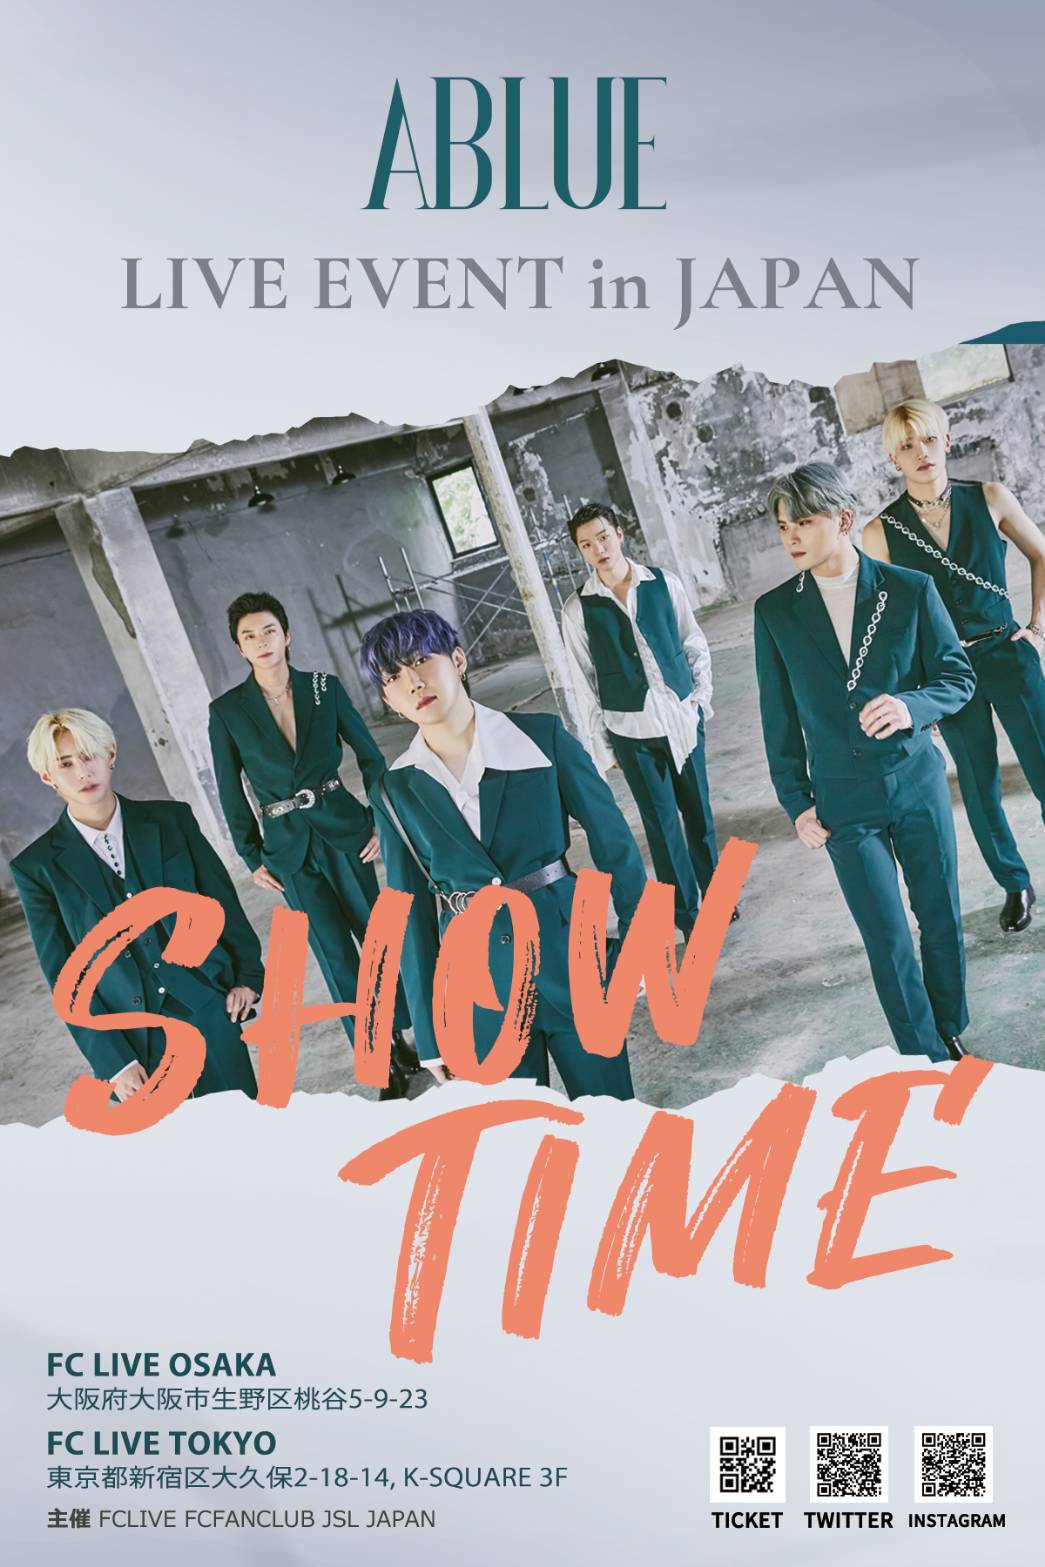 ABLUE LIVE EVENT in JAPAN